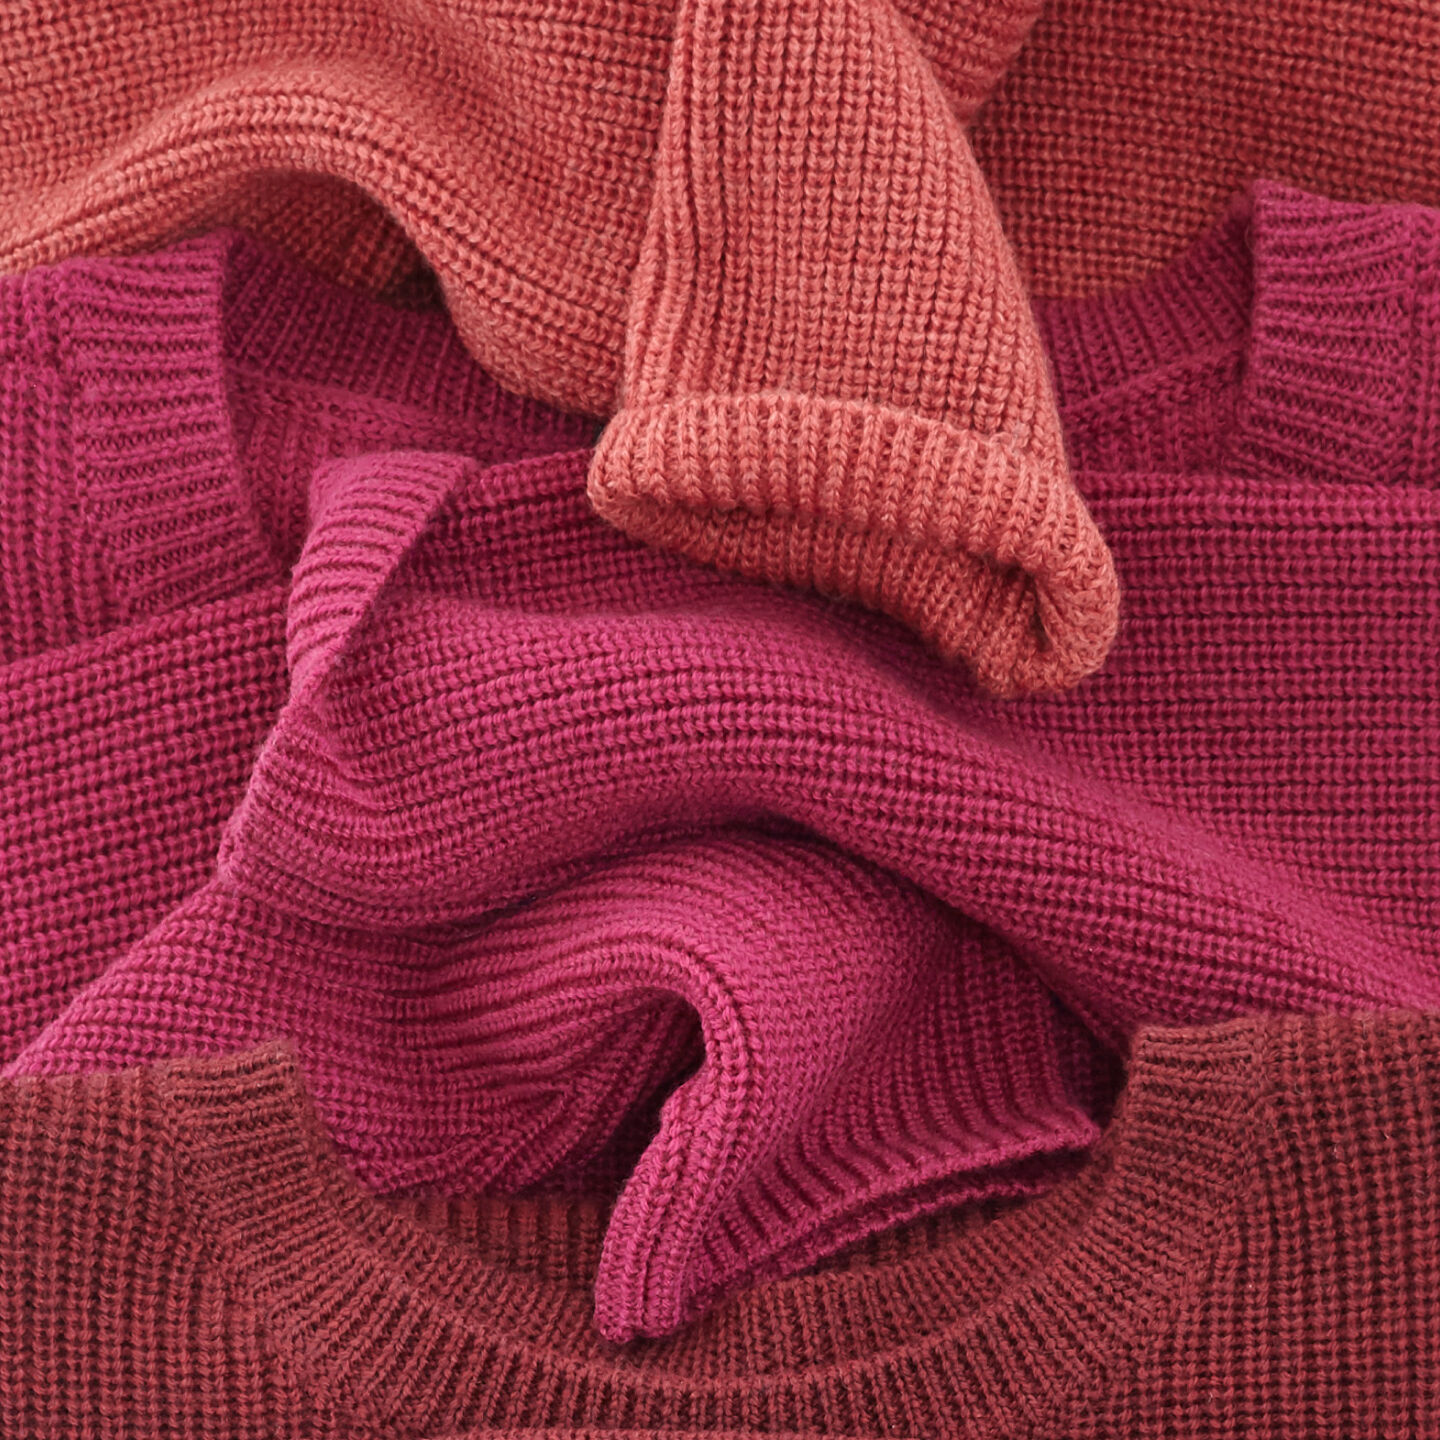 Berry colored sweaters folded in a row.